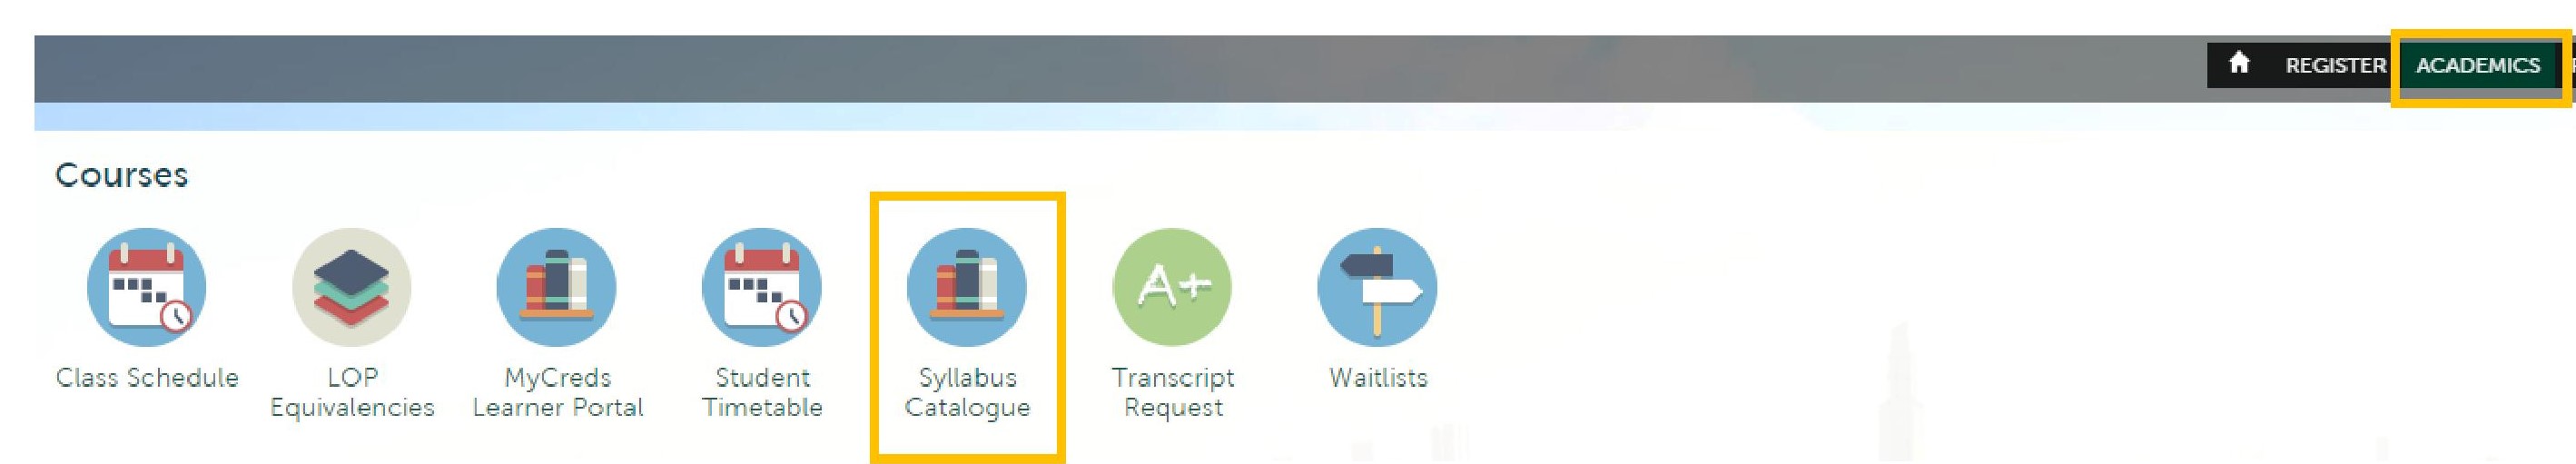 A screenshot of the Syllabus Catalogue icon on the myTrent portal